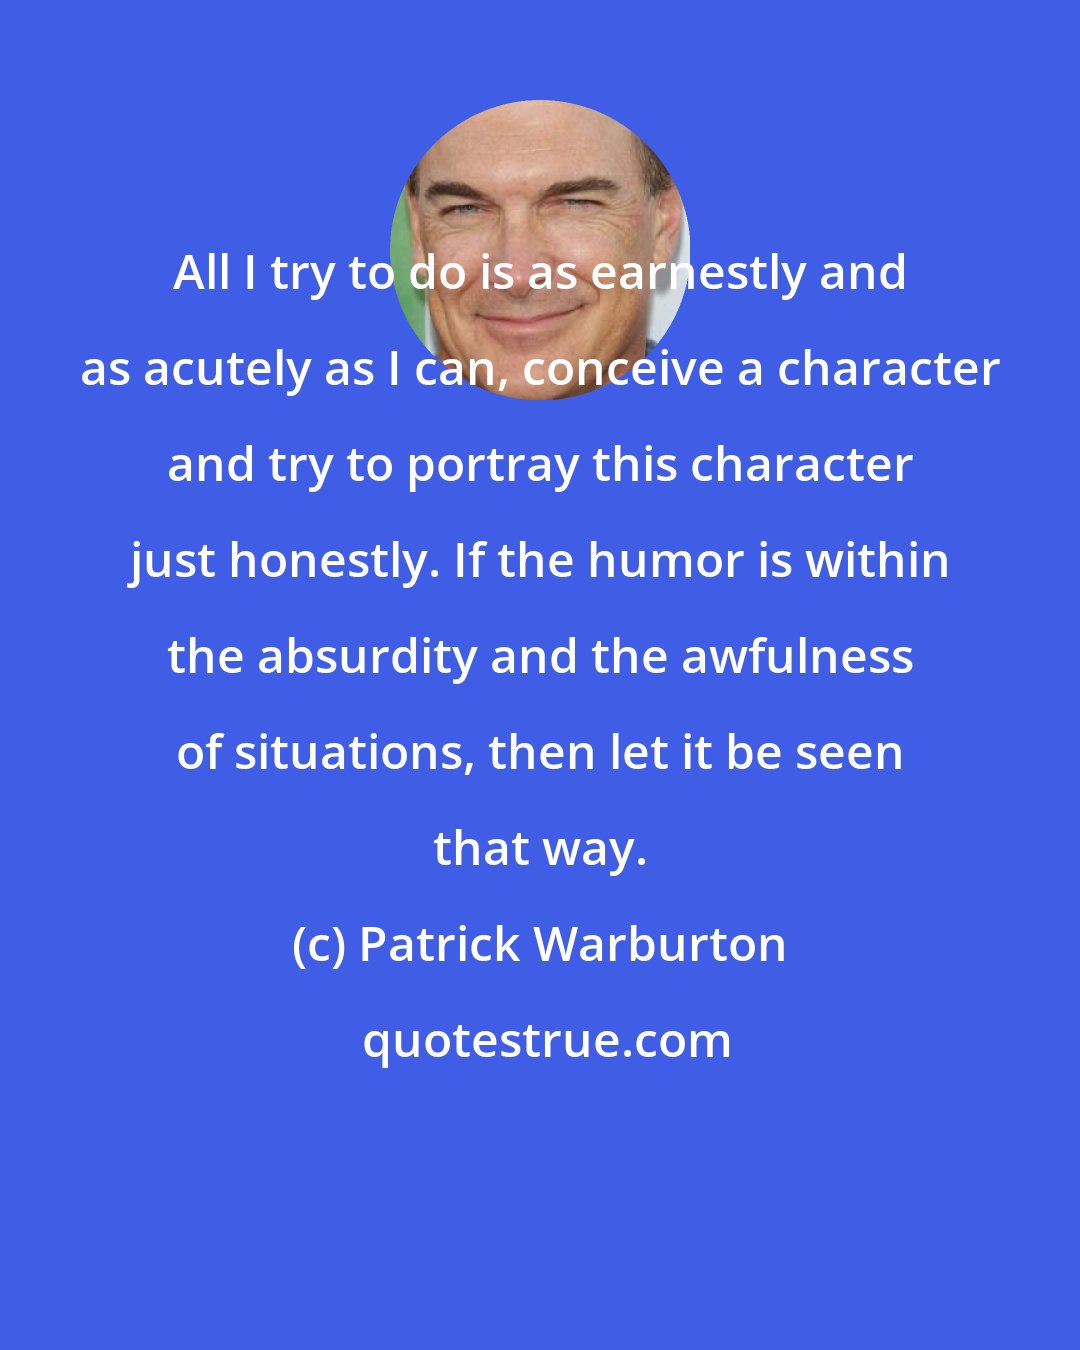 Patrick Warburton: All I try to do is as earnestly and as acutely as I can, conceive a character and try to portray this character just honestly. If the humor is within the absurdity and the awfulness of situations, then let it be seen that way.